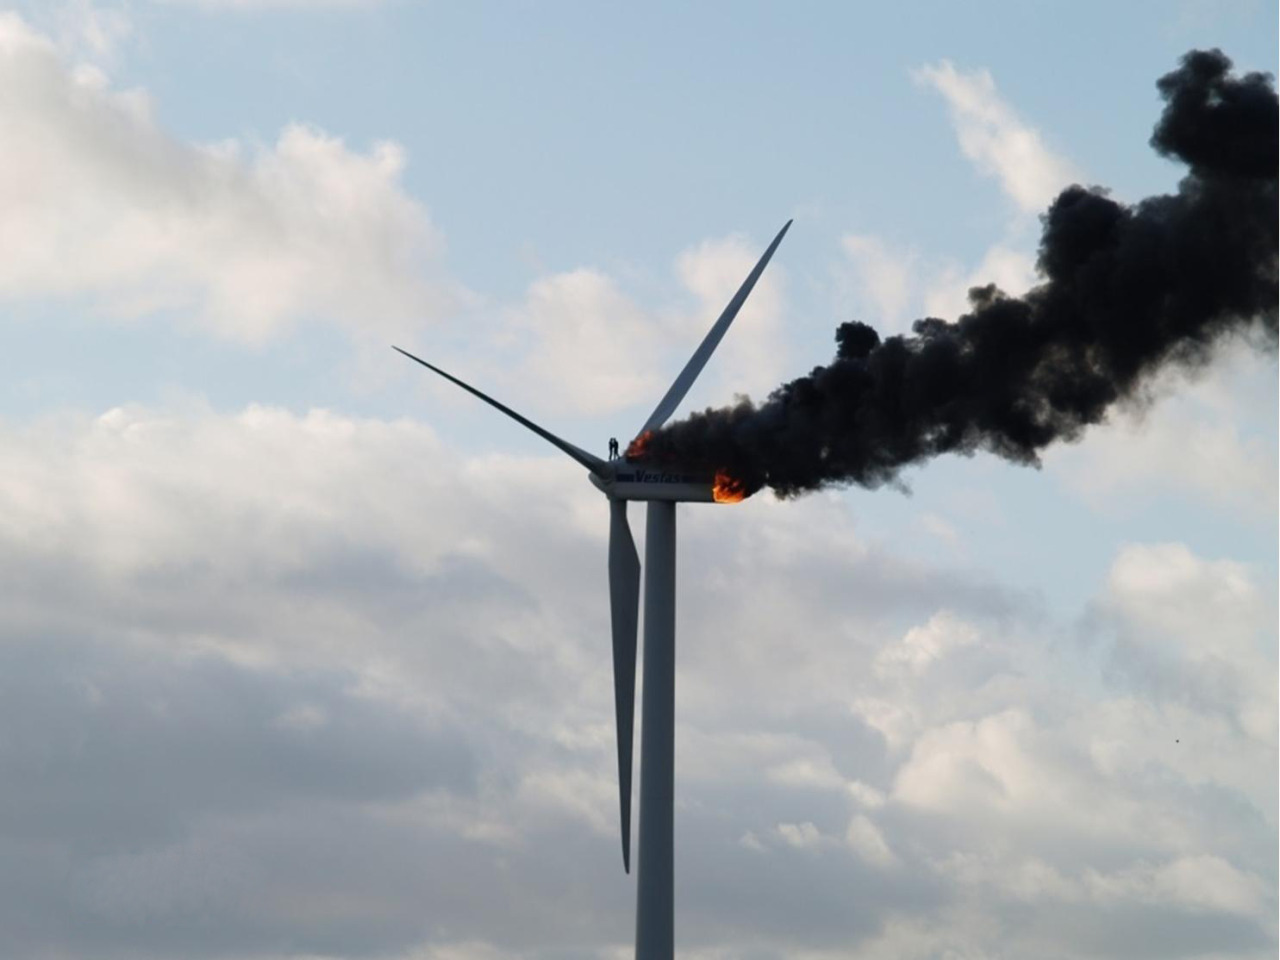 A heart breaking photograph of two engineers stranded atop a wind turbine that caught on fire. 
The two engineers are seen hugging each other as they accept the harsh reality that they are going to die.